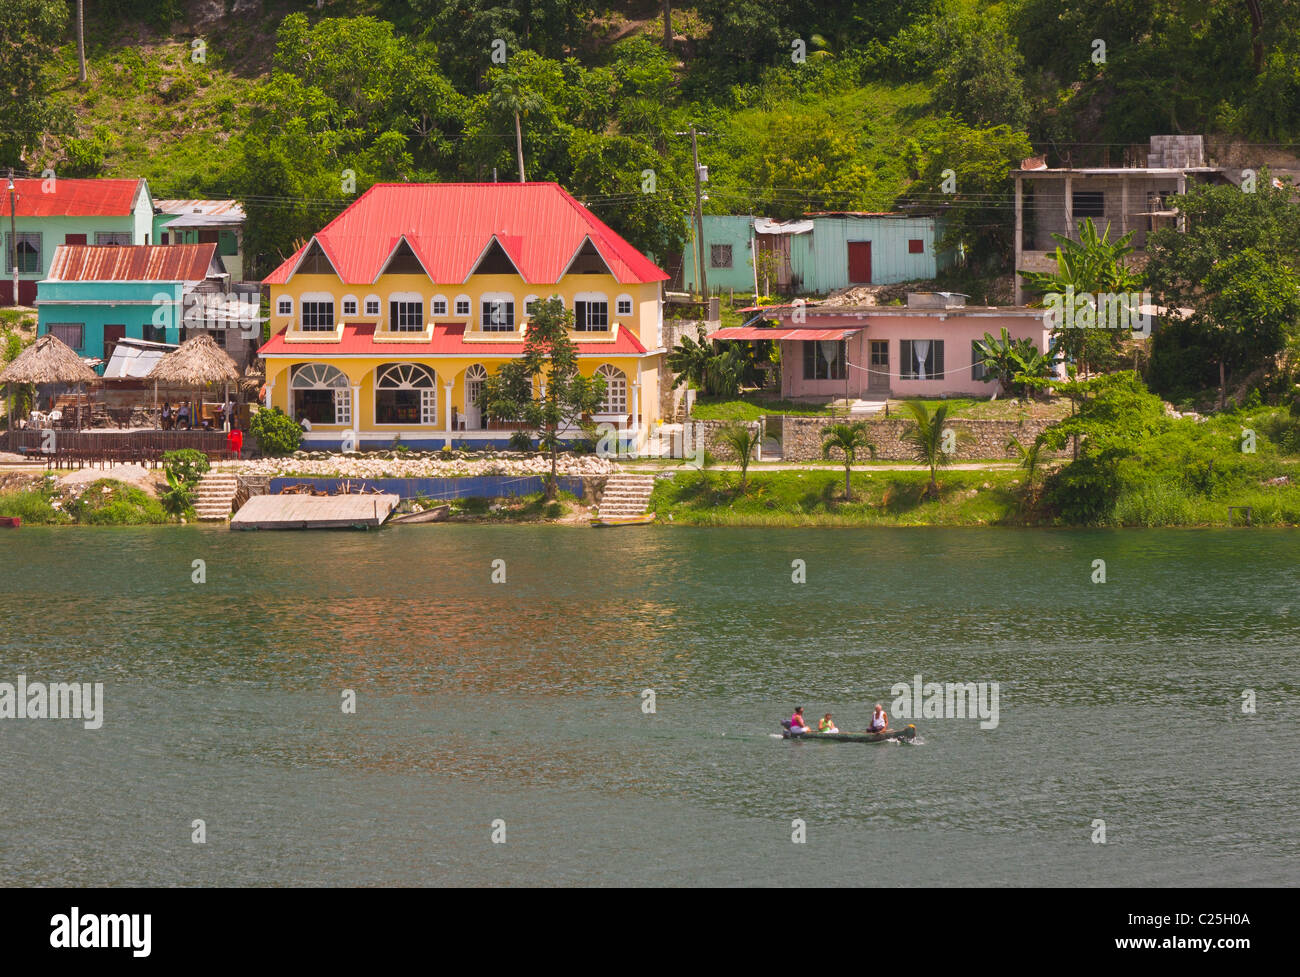 FLORES, GUATEMALA - Colorful buildings on the shore of Lago Peten Itza, near the colonial town of Flores. Stock Photo